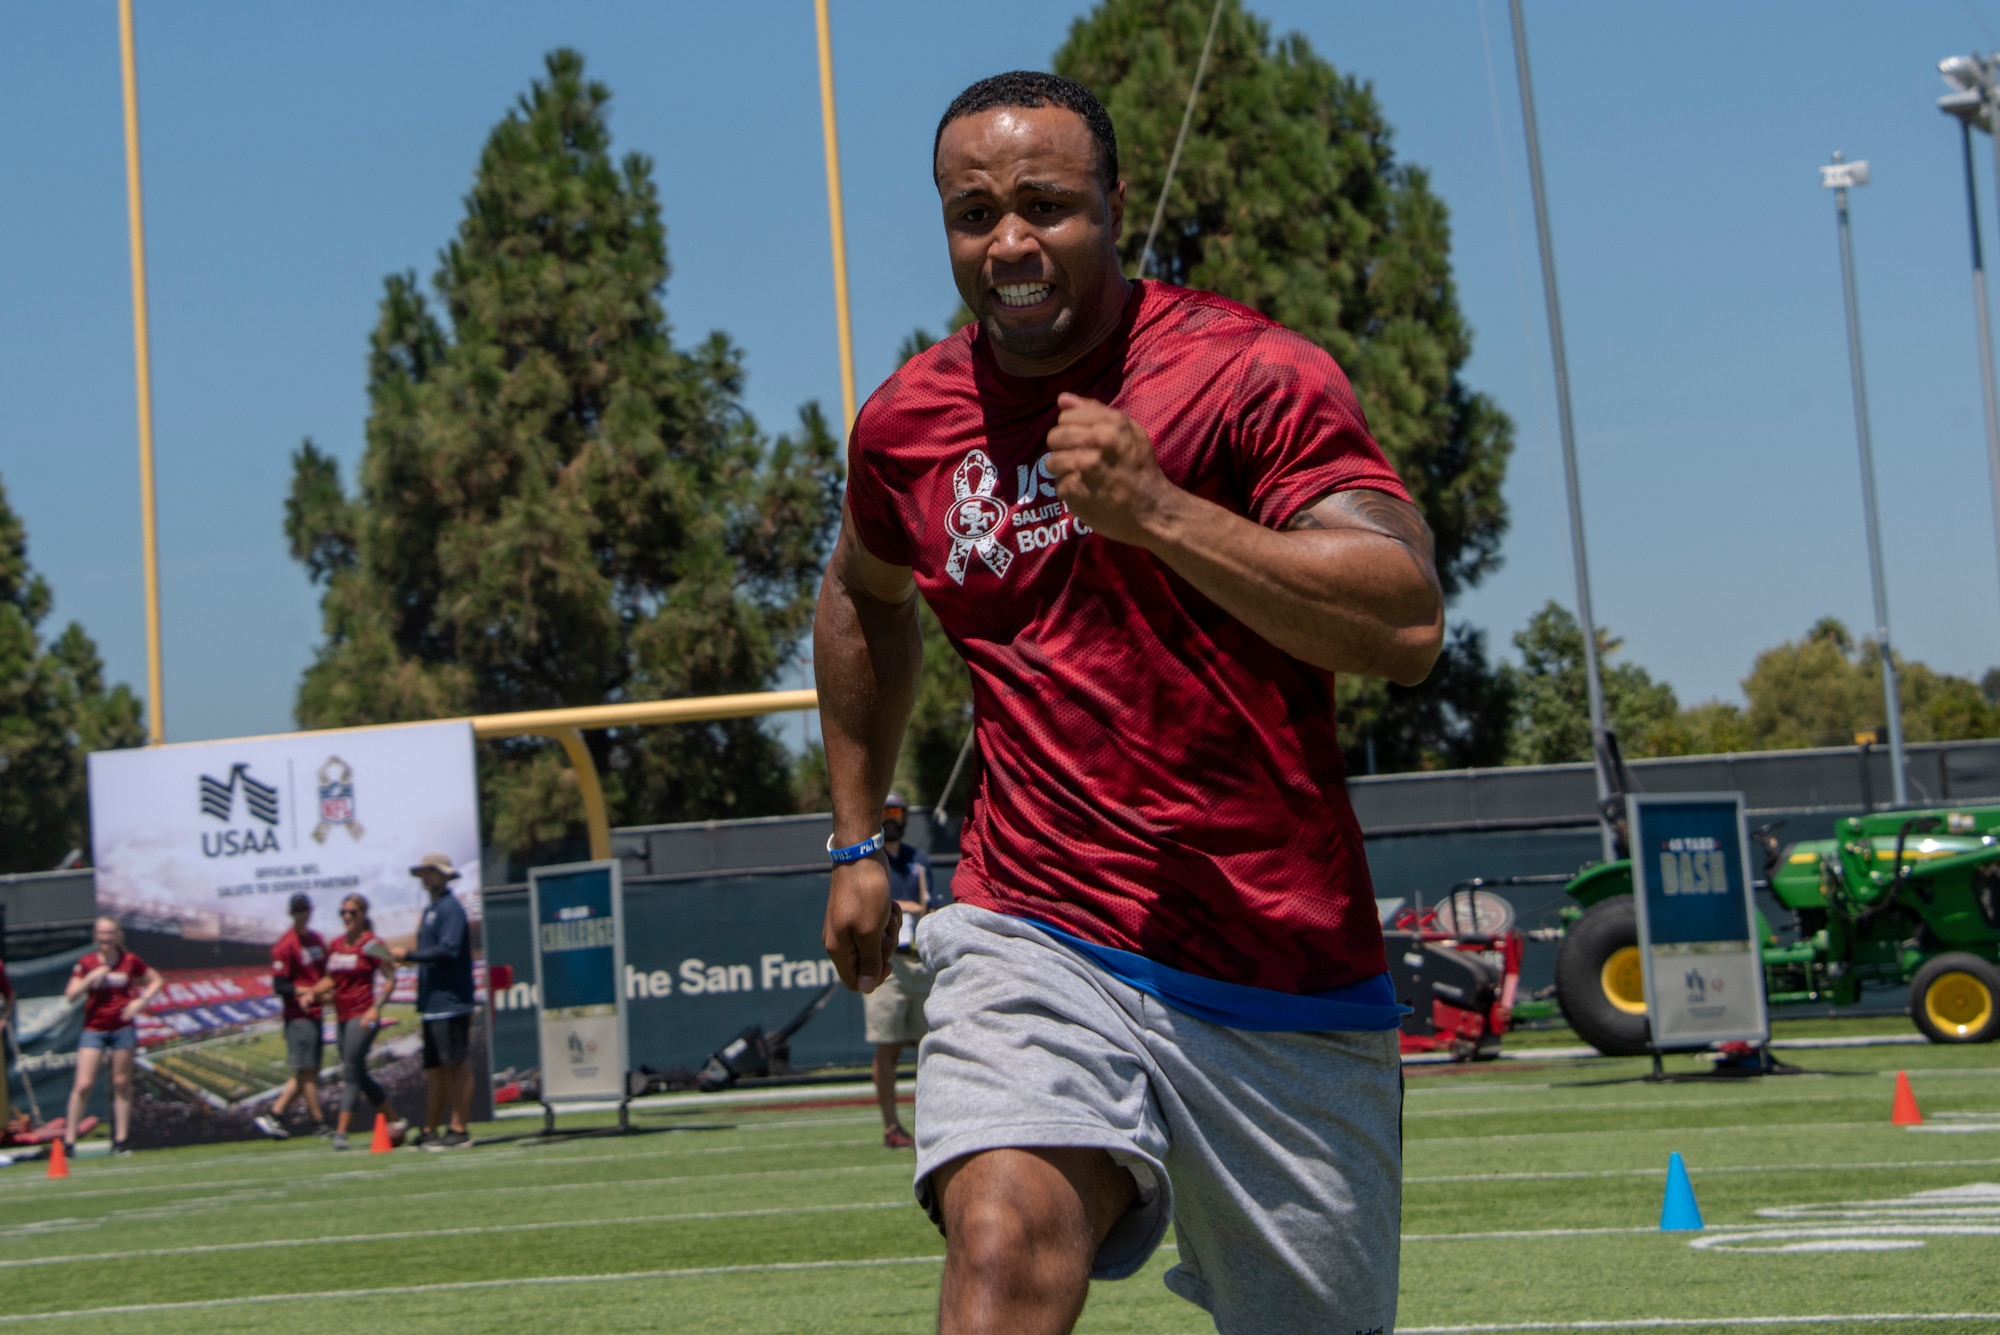 A U.S. Airman from Travis Air Force Base, California, competes in the 40-yard dash Aug. 13, 2019, during the Salute to Service Boot Camp in Santa Clara, California. The event provided Airmen with an opportunity to interact with NFL players and compete against one another in a variety of athletic drills. (U.S. Air Force photo by Tech. Sgt. James Hodgman)